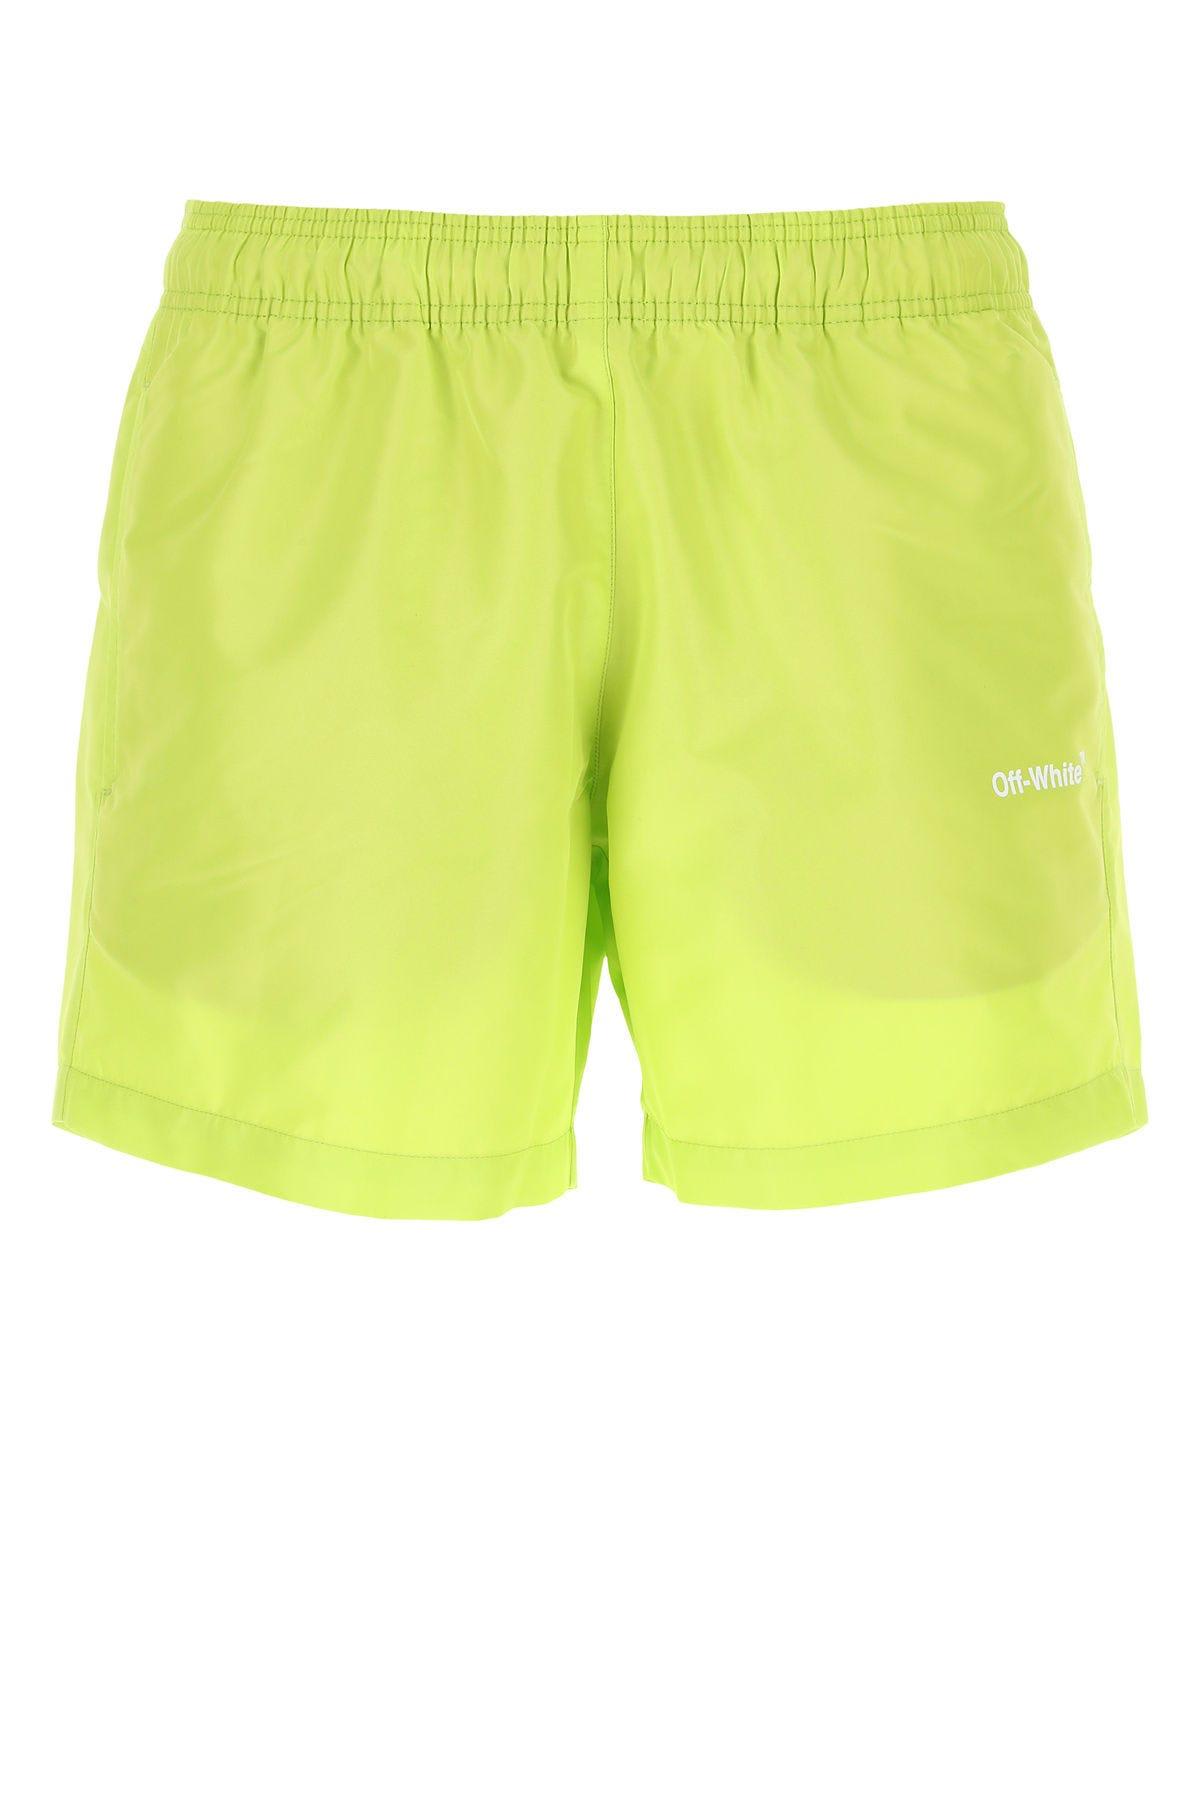 Off-White Fluo Yellow Polyester Swimming Shorts